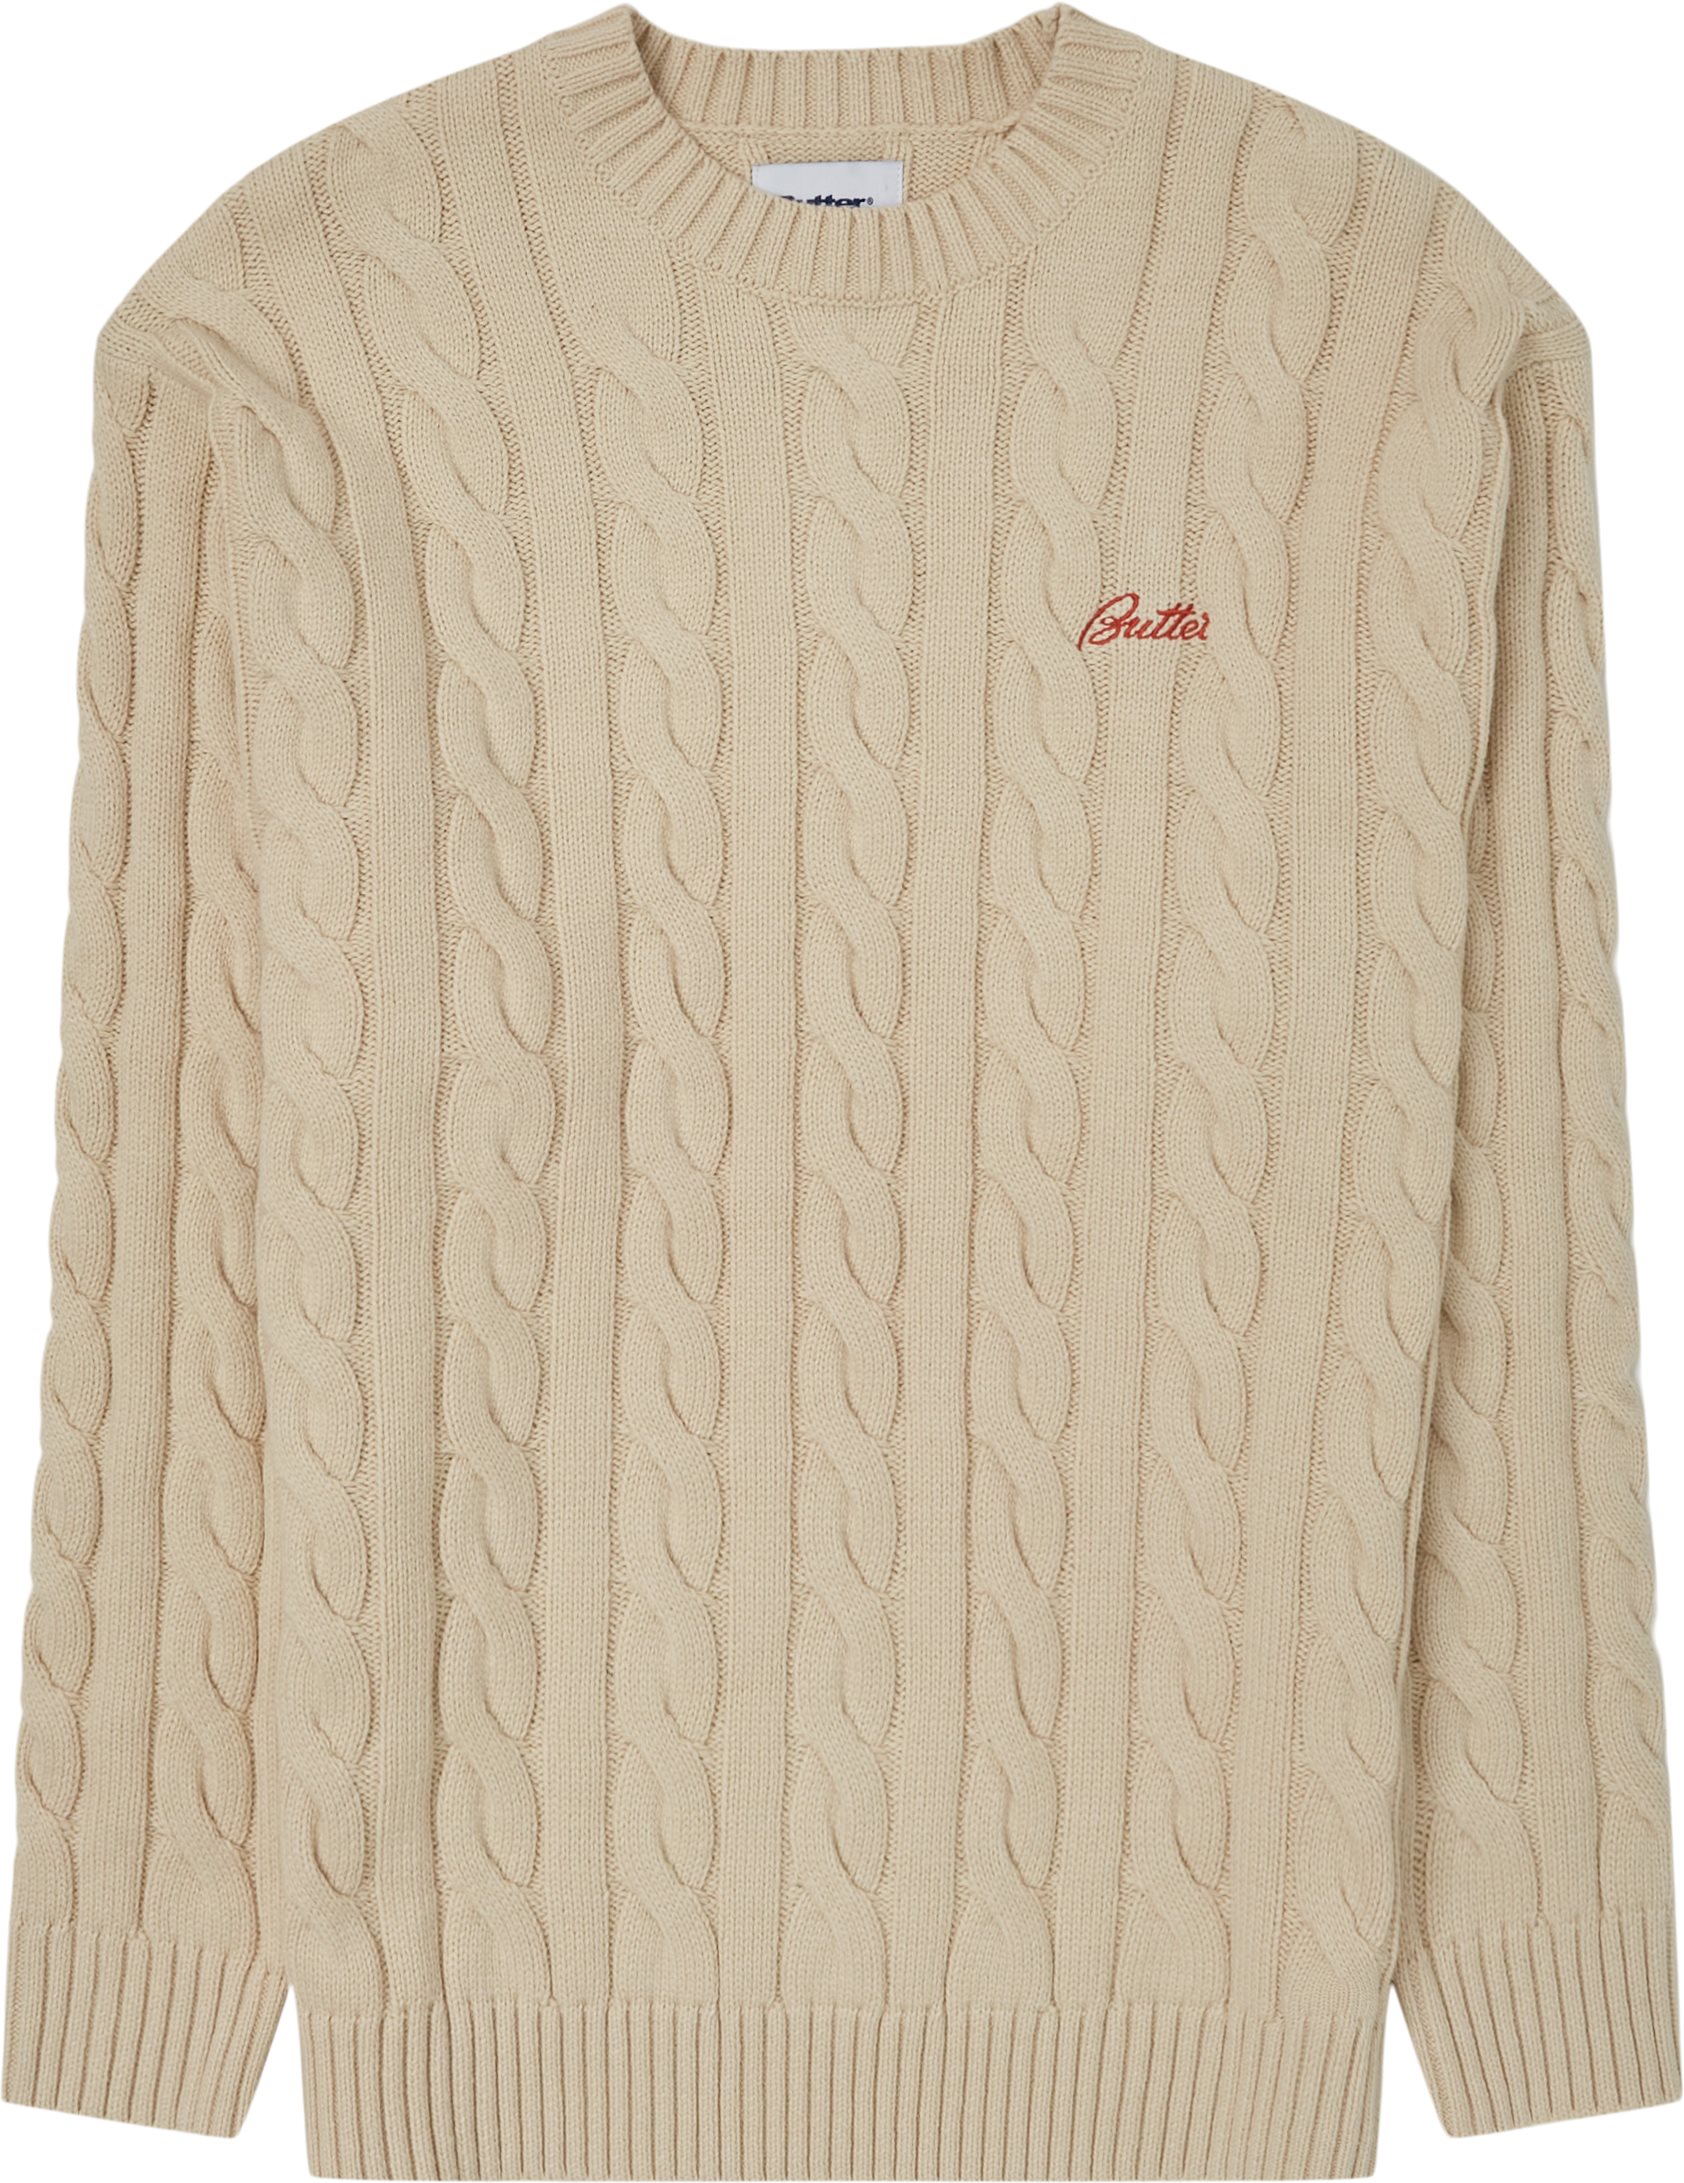 Cable Knit Sweater - Stickat - Regular fit - Sand